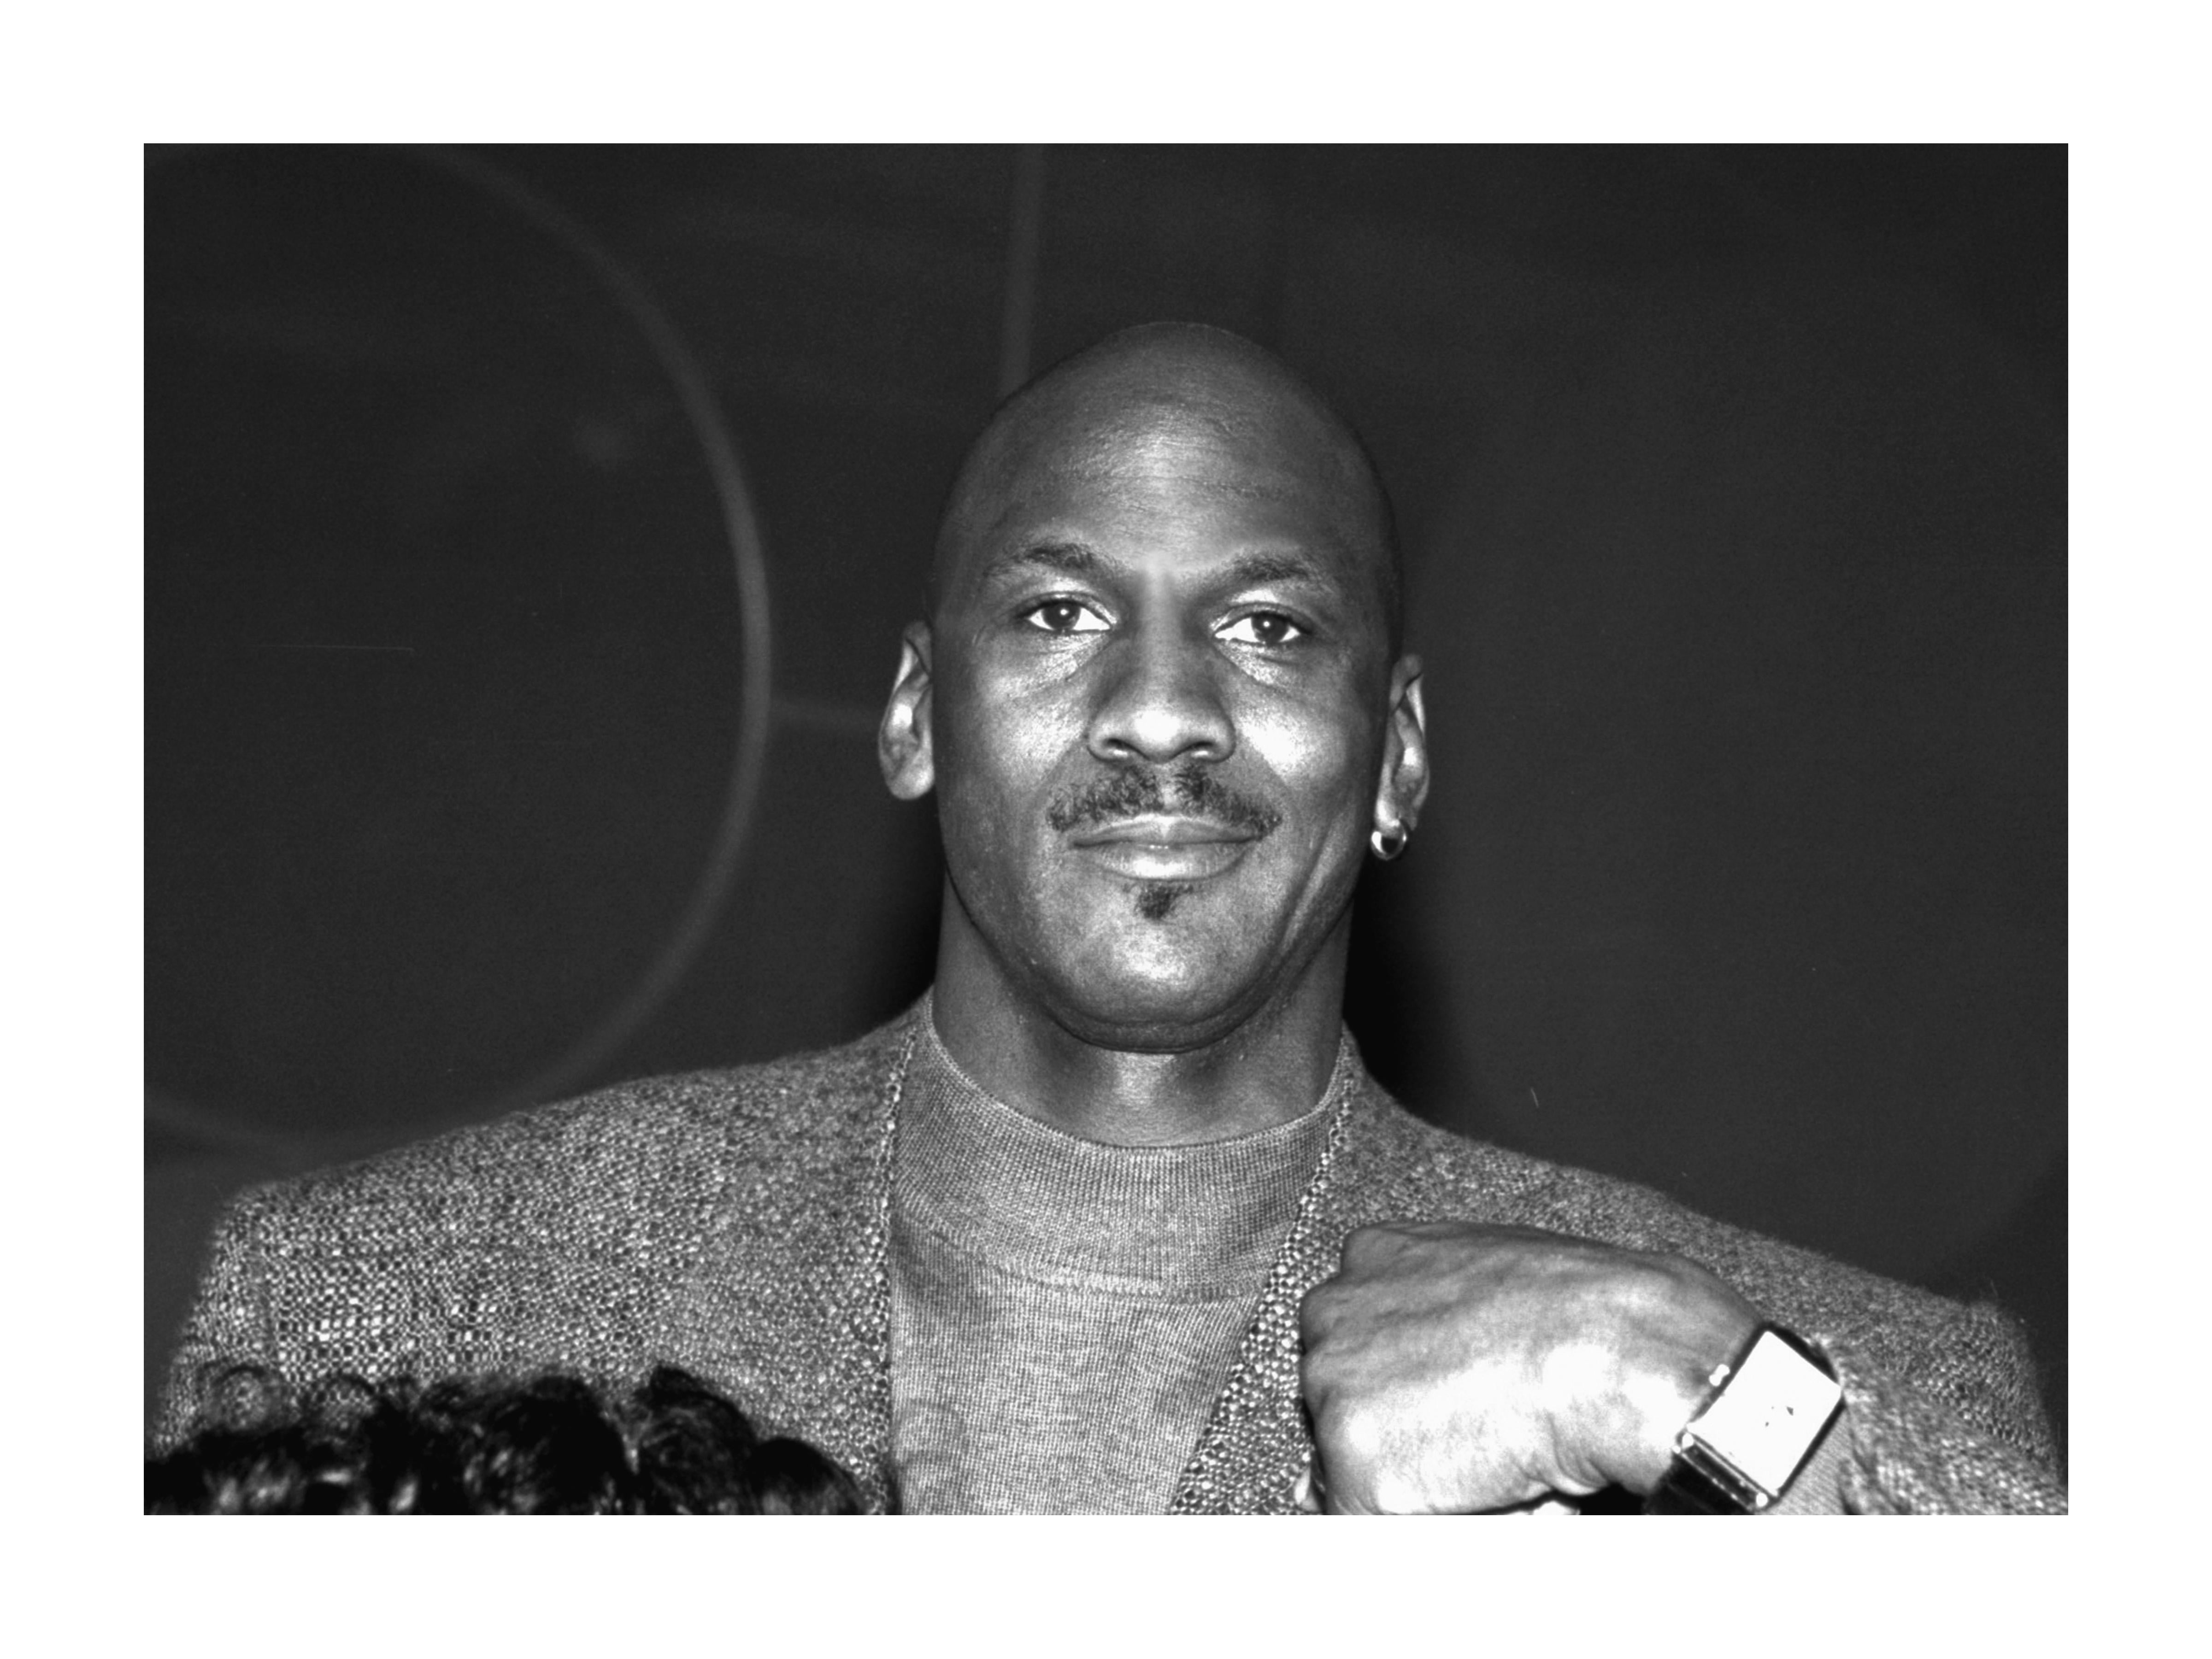 Richard Shay Black and White Photograph - Michael Jordan on His 40th Birthday, 2003 - B&W Photograph, Matted and Framed